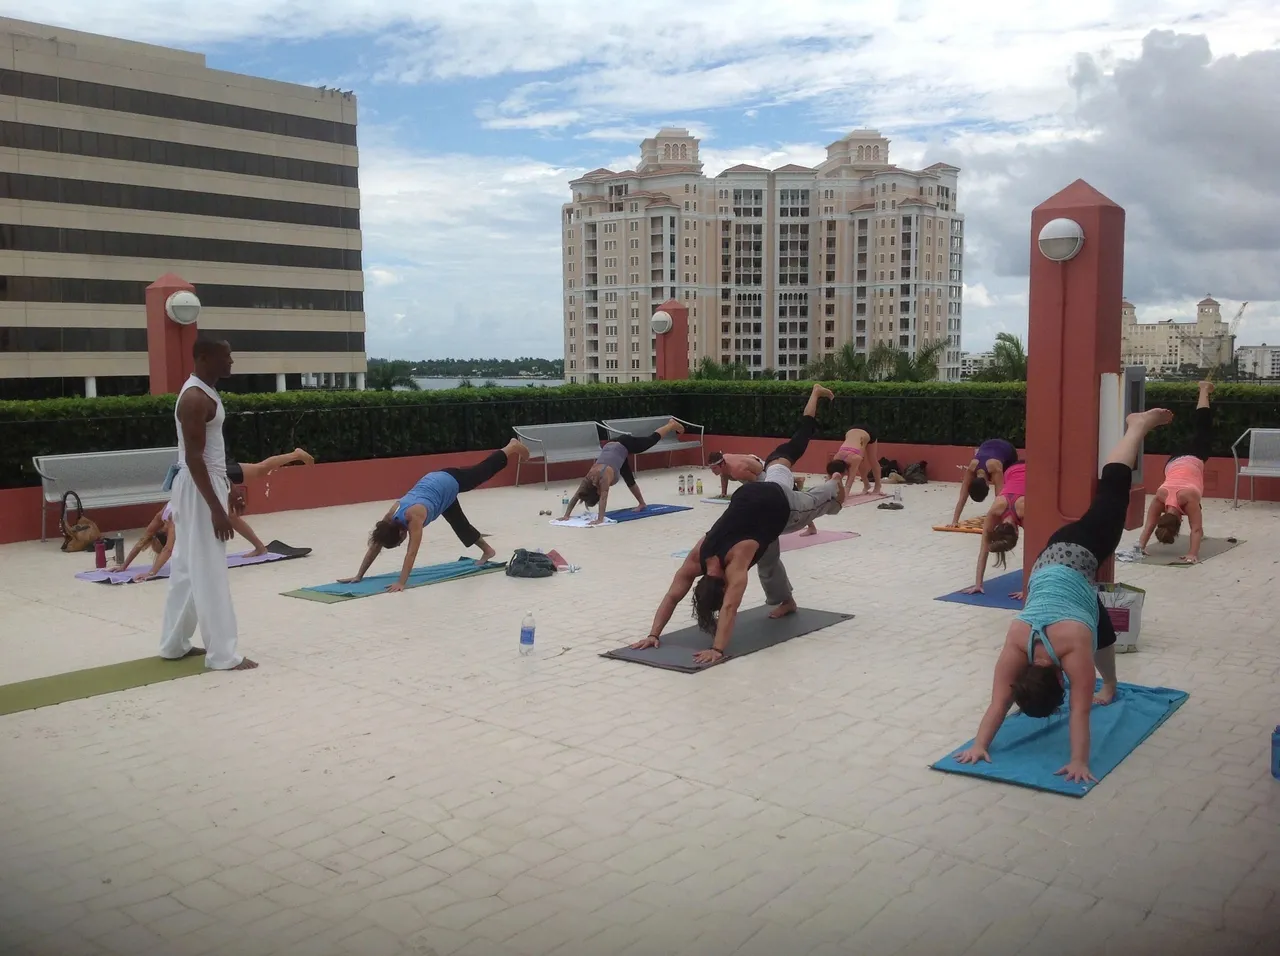 A group of people doing yoga on the roof.